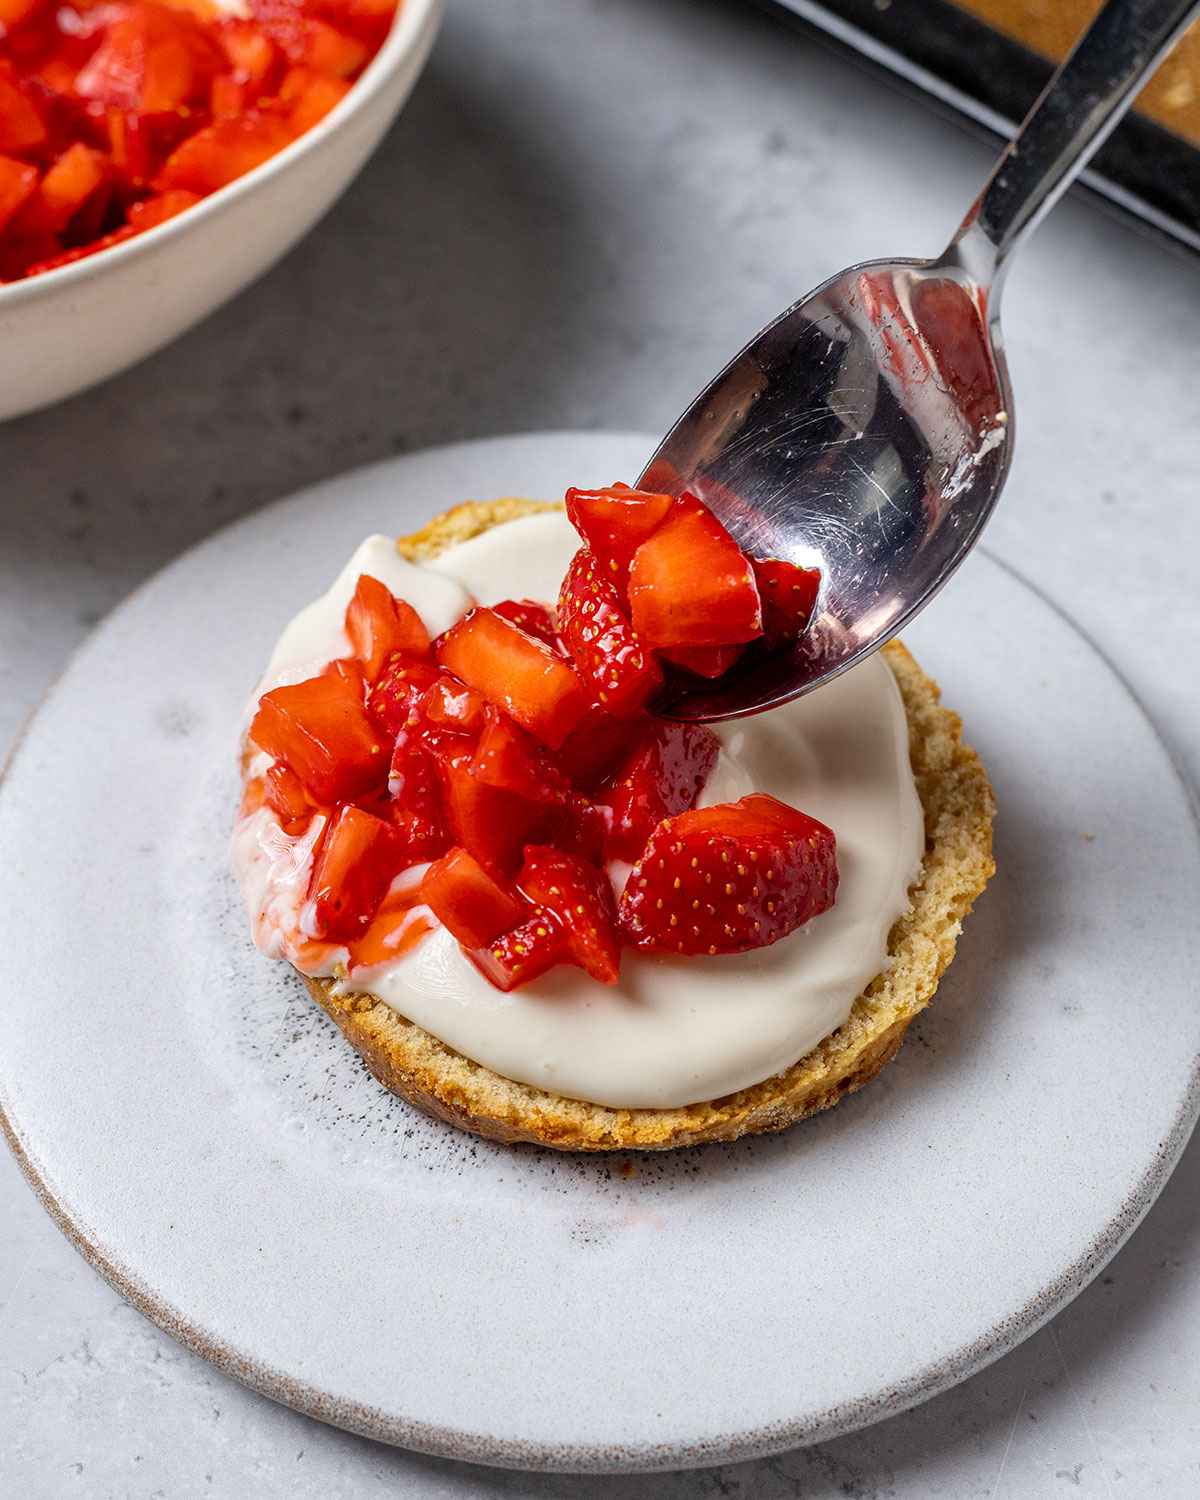 spooning chopped strawberries onto the coconut cream on shortcake